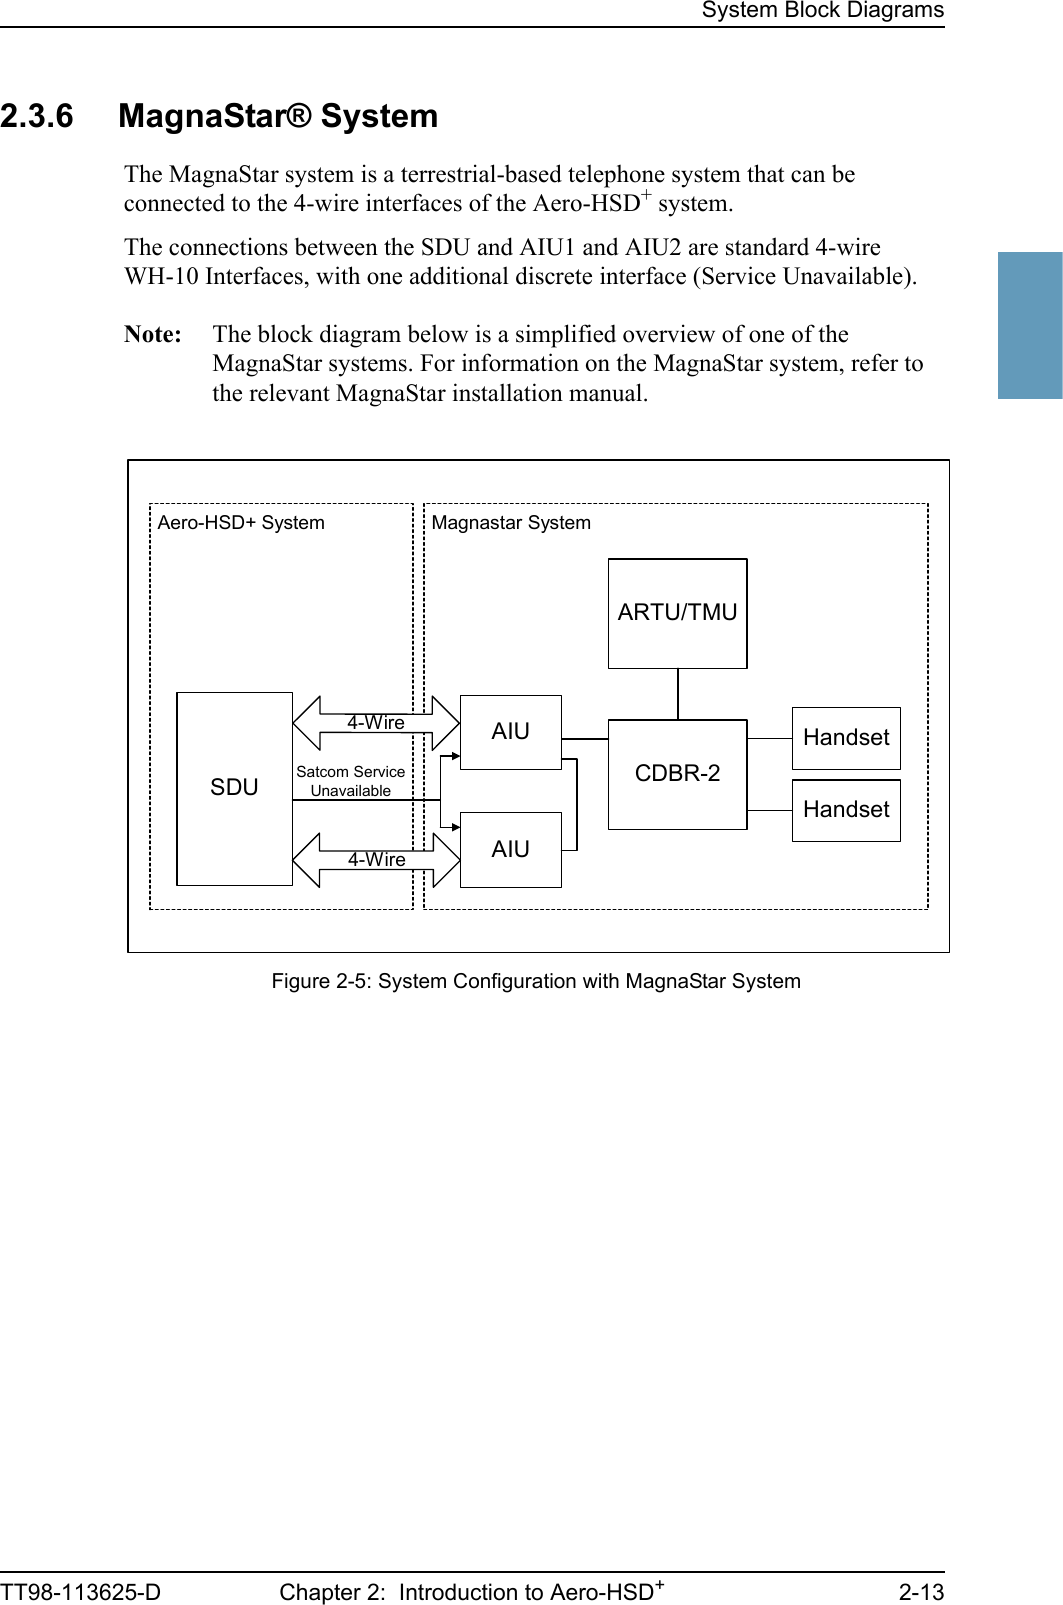 System Block DiagramsTT98-113625-D Chapter 2:  Introduction to Aero-HSD+2-1322222.3.6 MagnaStar® SystemThe MagnaStar system is a terrestrial-based telephone system that can be connected to the 4-wire interfaces of the Aero-HSD+ system.The connections between the SDU and AIU1 and AIU2 are standard 4-wire WH-10 Interfaces, with one additional discrete interface (Service Unavailable).Note: The block diagram below is a simplified overview of one of the MagnaStar systems. For information on the MagnaStar system, refer to the relevant MagnaStar installation manual.Figure 2-5: System Configuration with MagnaStar SystemMagnastar SystemSDUAero-HSD+ SystemAIUAIUCDBR-2ARTU/TMUHandsetHandset4-Wire4-WireSatcom ServiceUnavailable